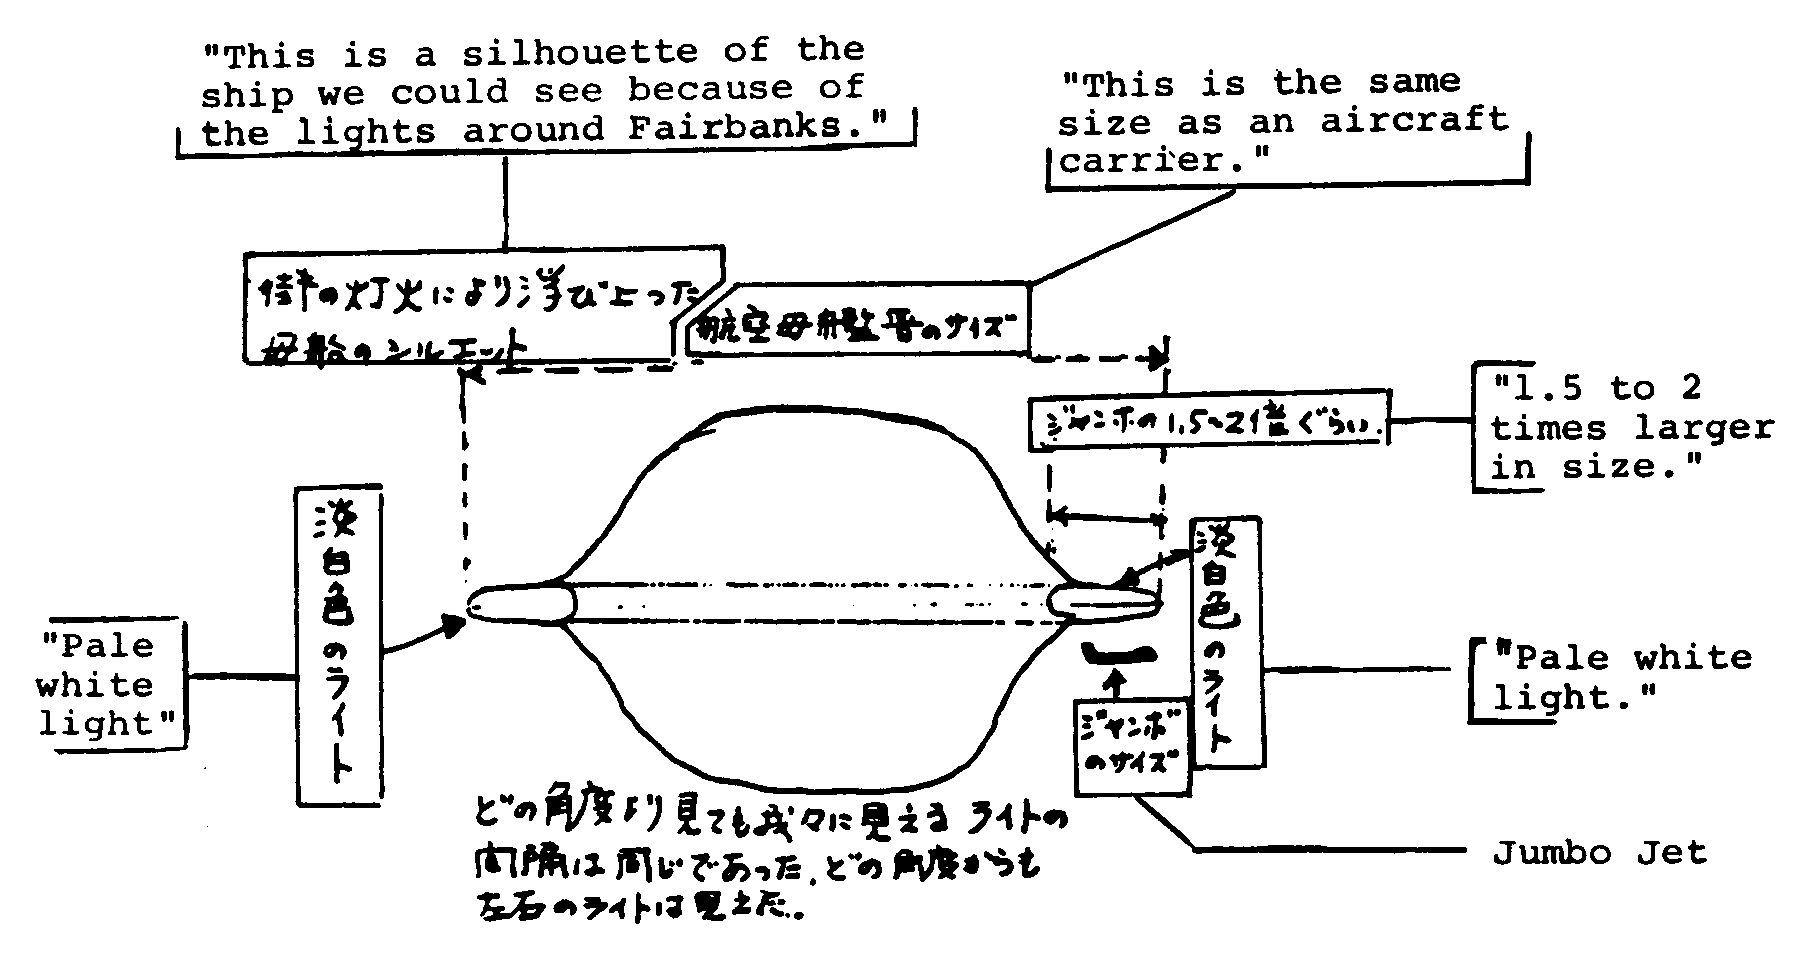 Figure 8: Capt. Terauchi's drawing, a month and a half after sighting, of "gigantic    spaceship"